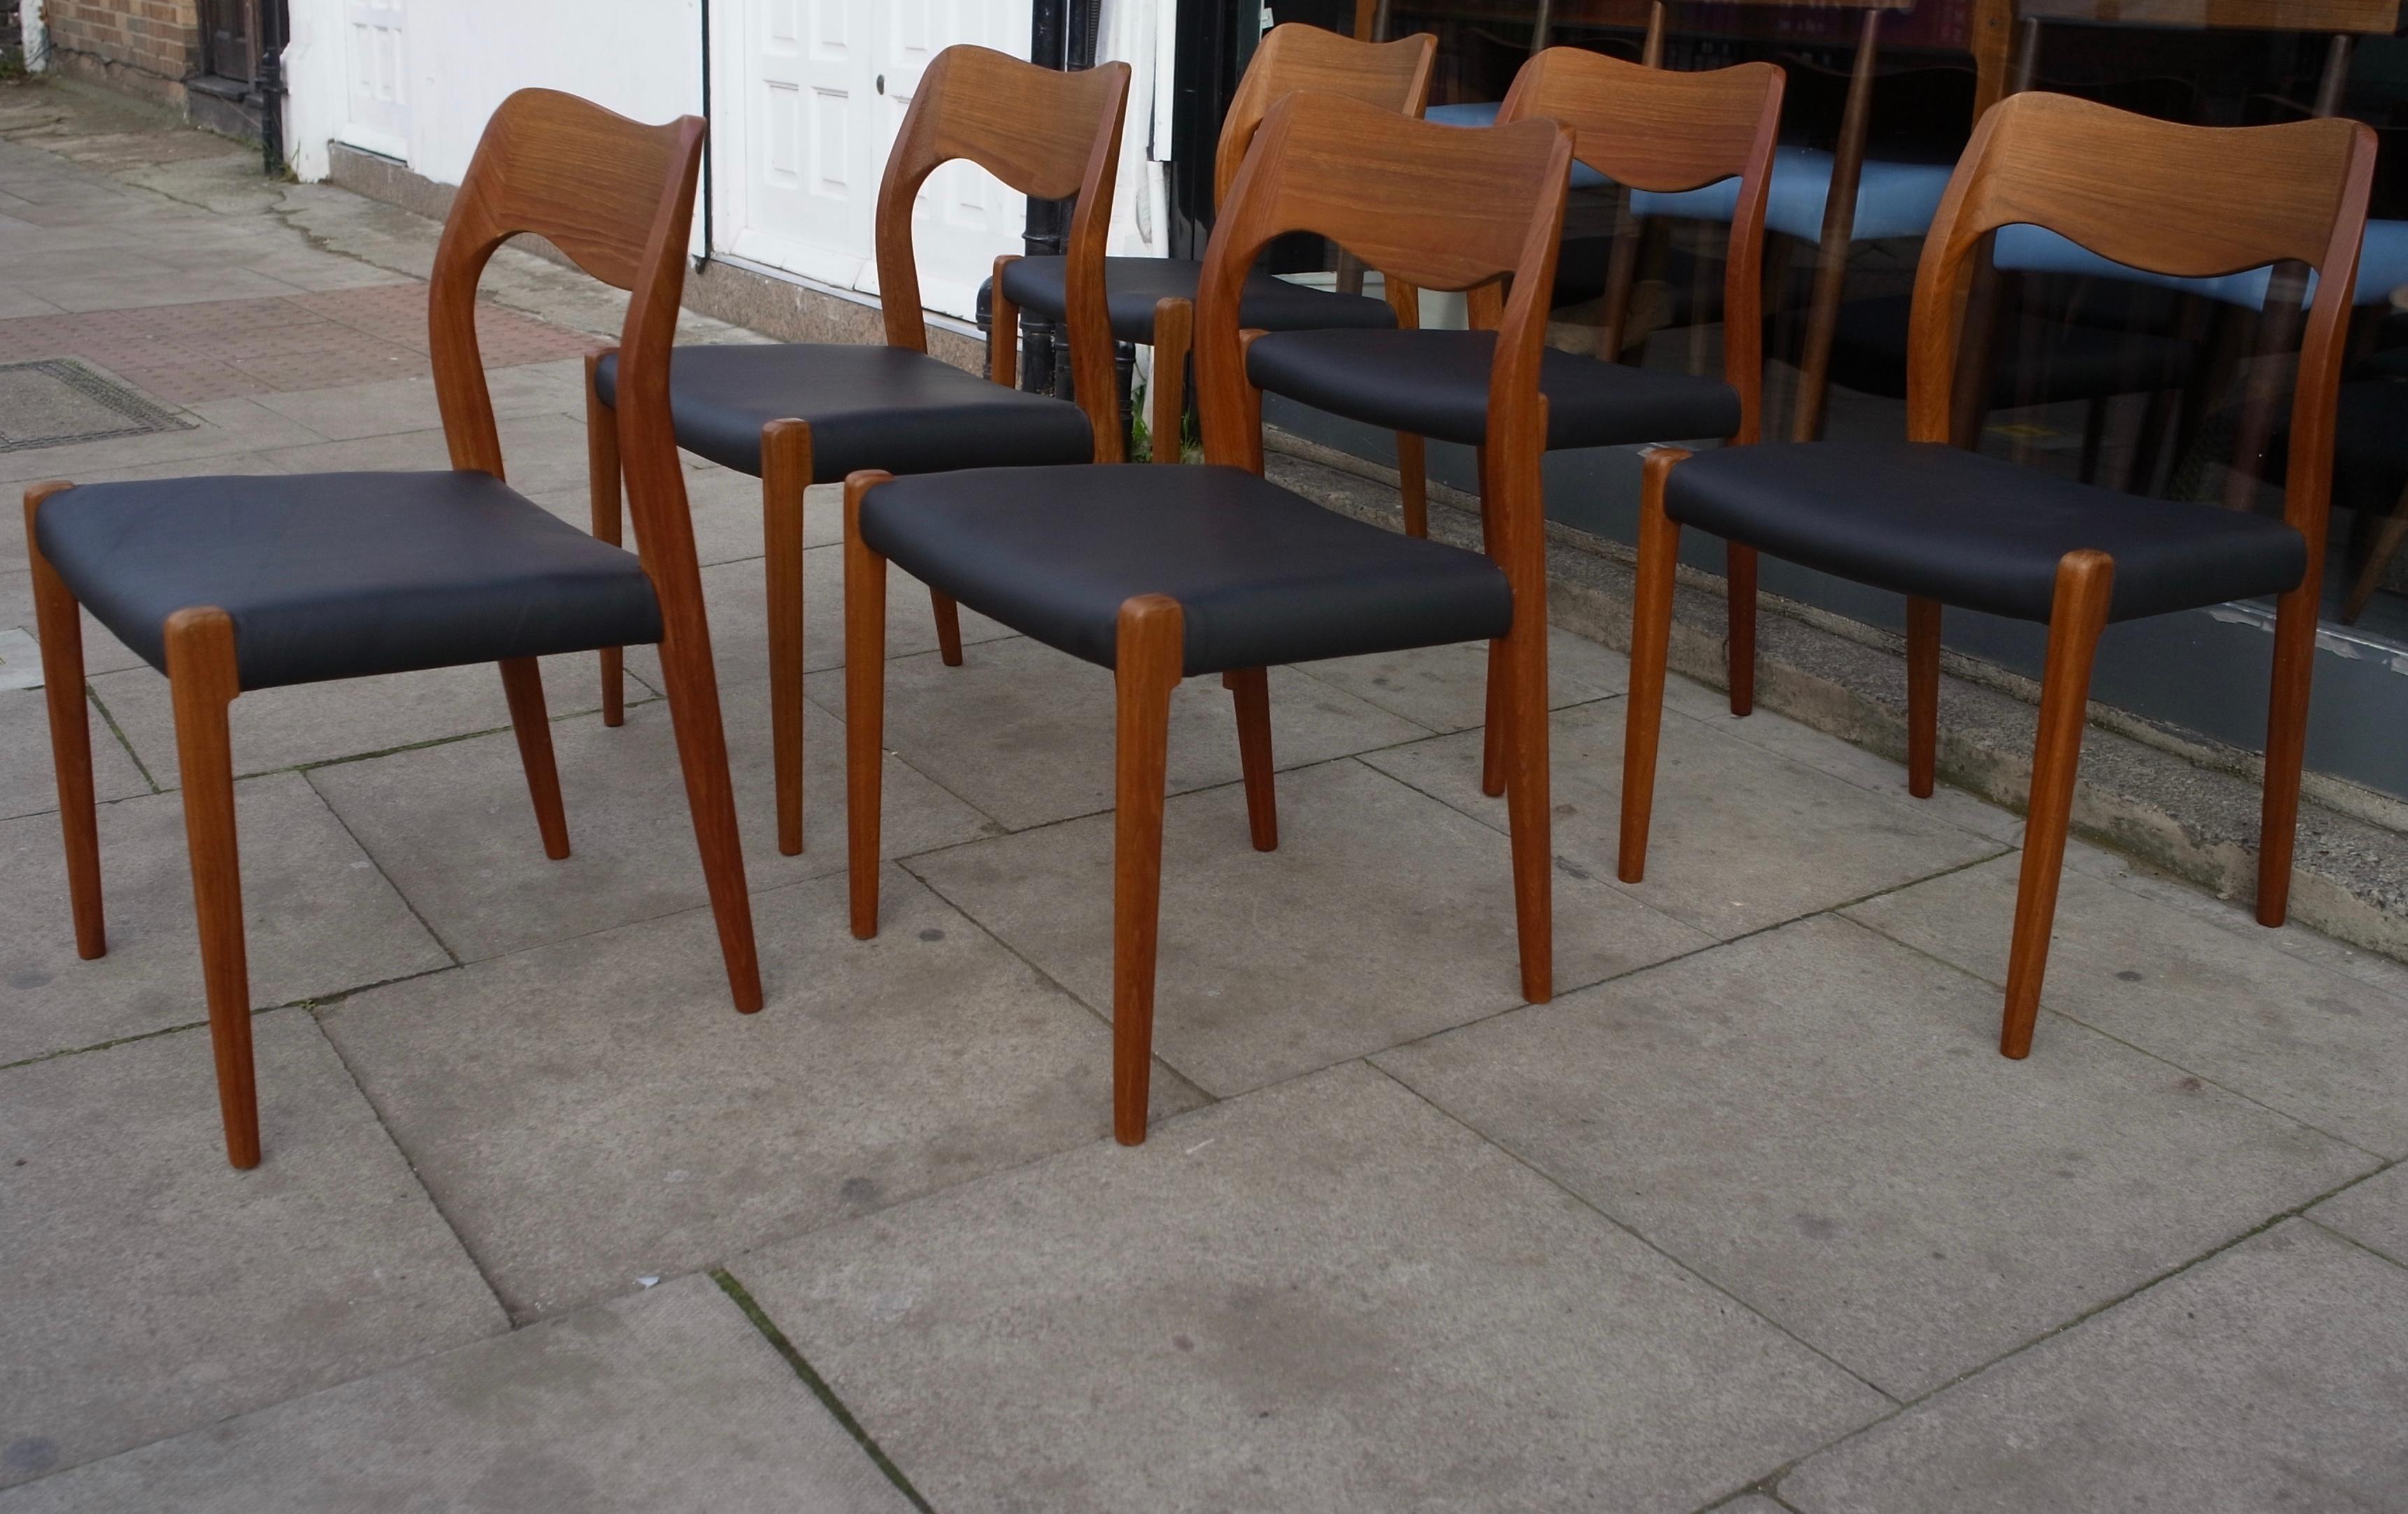 Six vintage teak framed Danish model 71 dining chairs reupholstered in quality black leather.  Designed by Niels O Moller and manufactured by J.L. Møller, these chairs are in very good vintage condition, having been restored, refurbished and